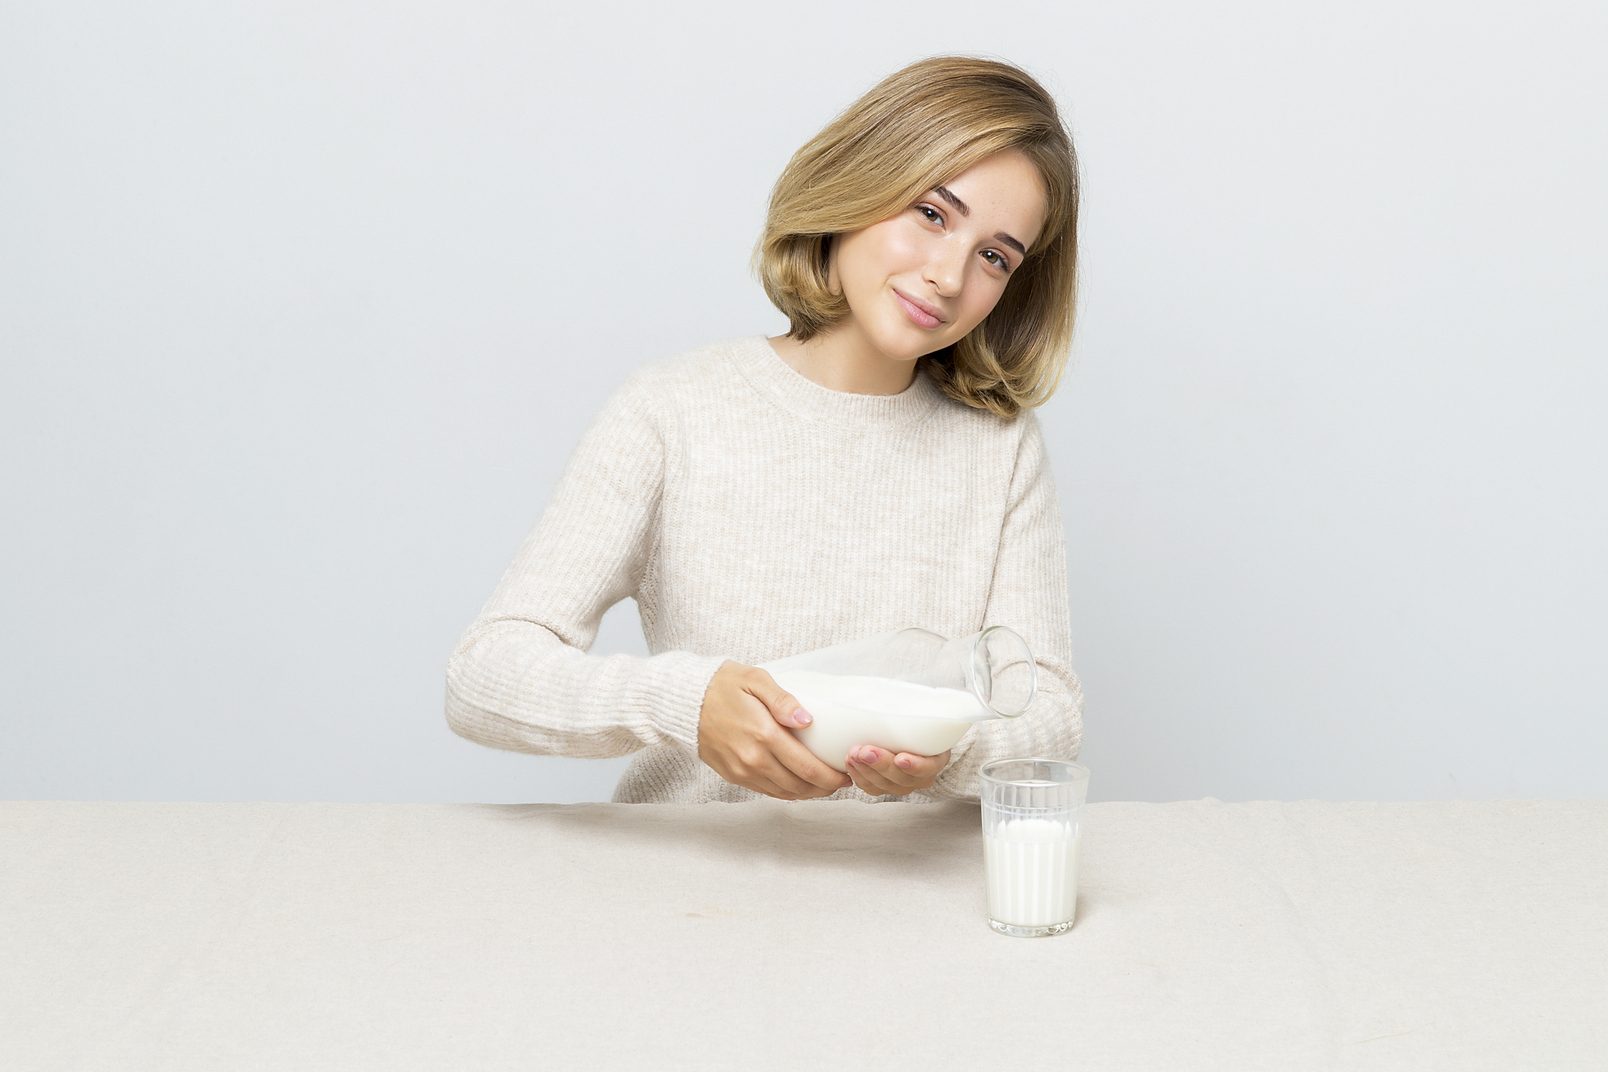 World milk day 2021: a girl in a light gray sweater sits at the table and pours milk into a glass